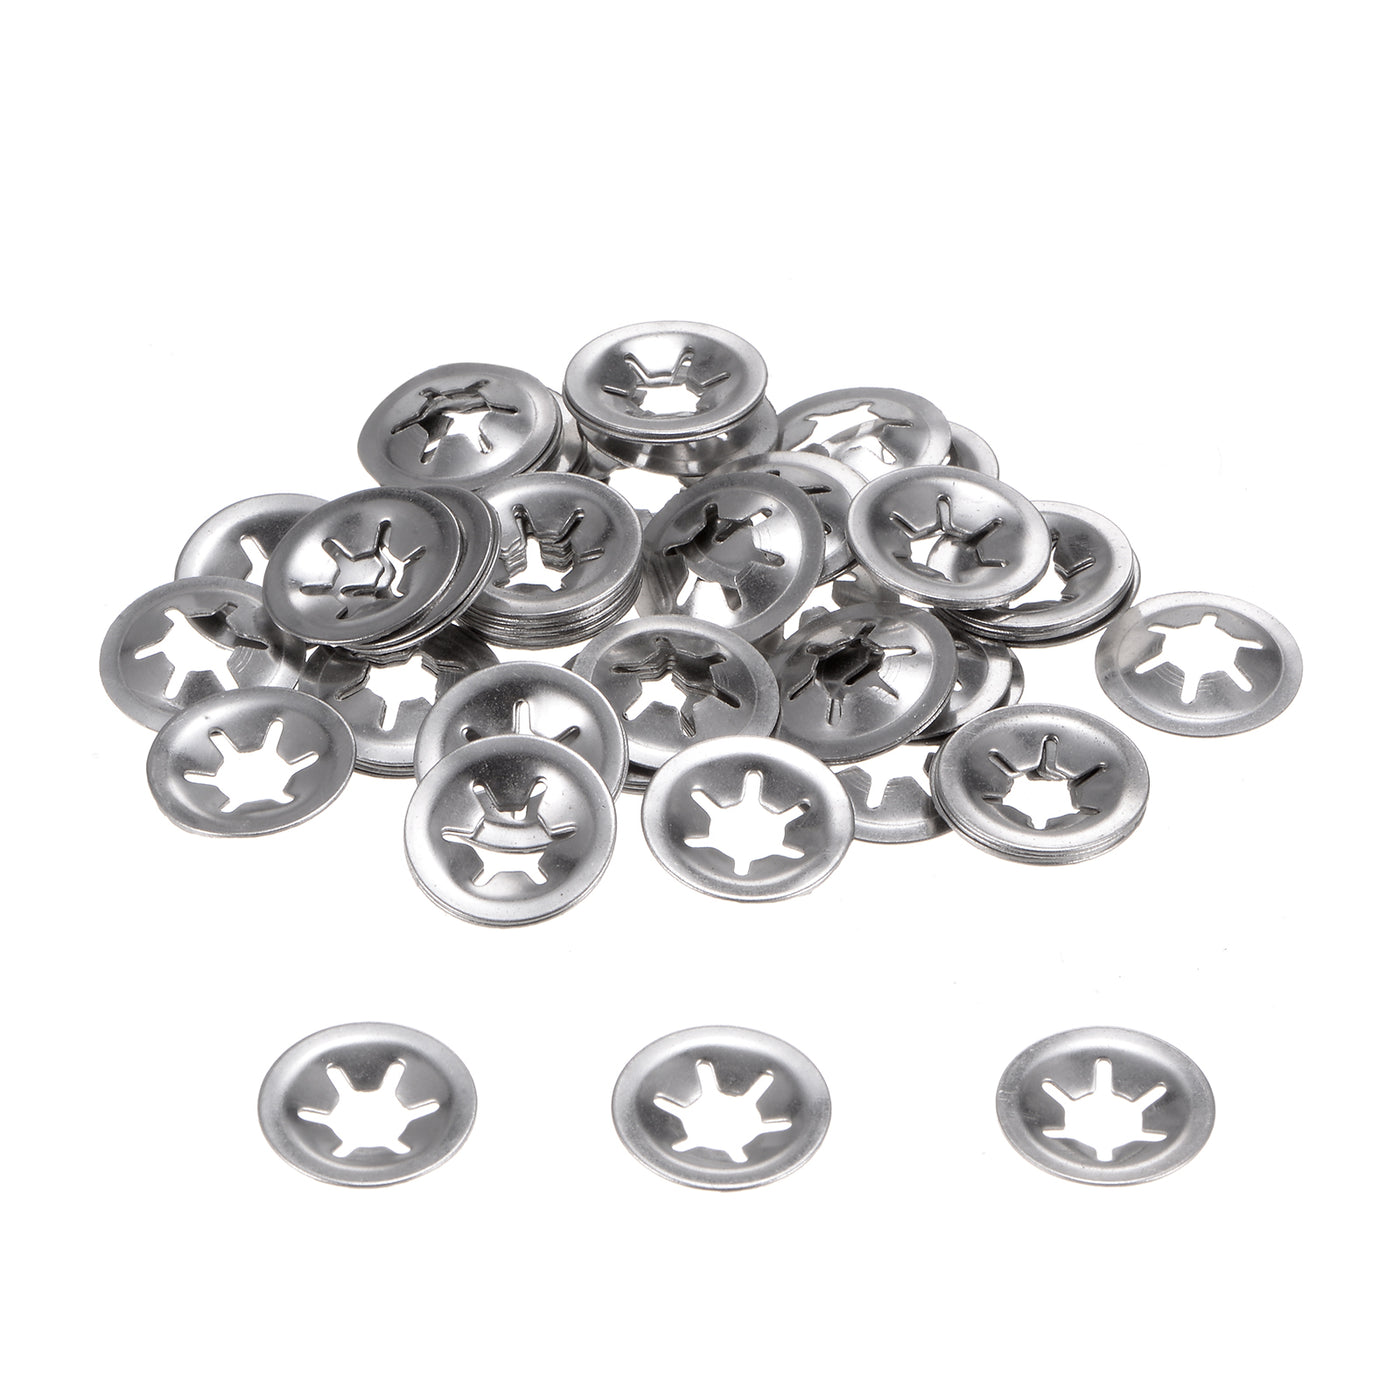 uxcell Uxcell 60pcs Internal Tooth Star Lock Washers M6 Stainless Steel Starlock Push Nuts